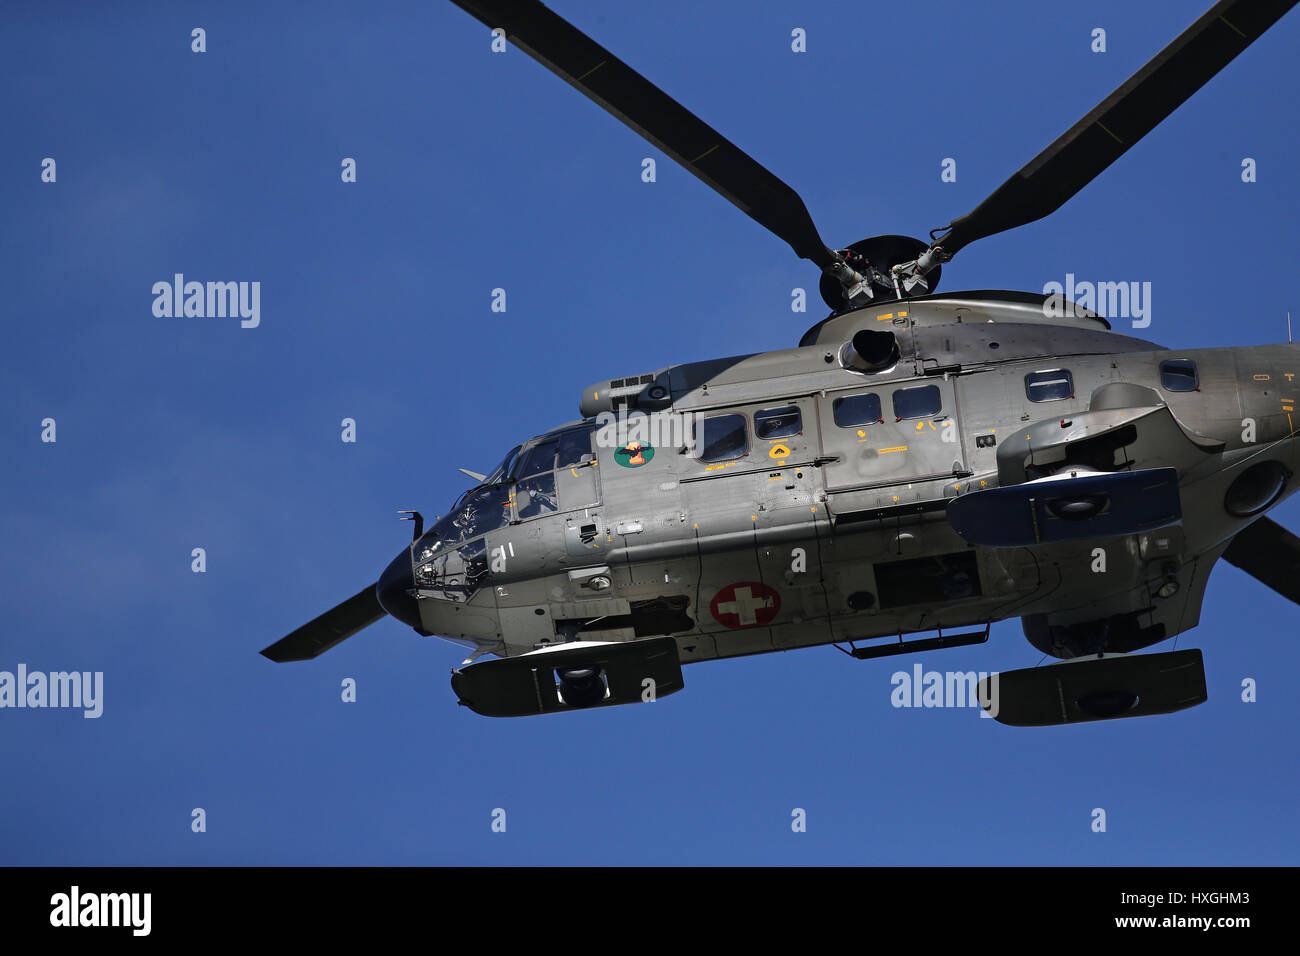 Locarno Airport,Ticino, Switzerland; March 27, 2017: a Swiss Air Force military Eurocopter AS332 Super Puma helicopter used in SAR operations with ski Stock Photo